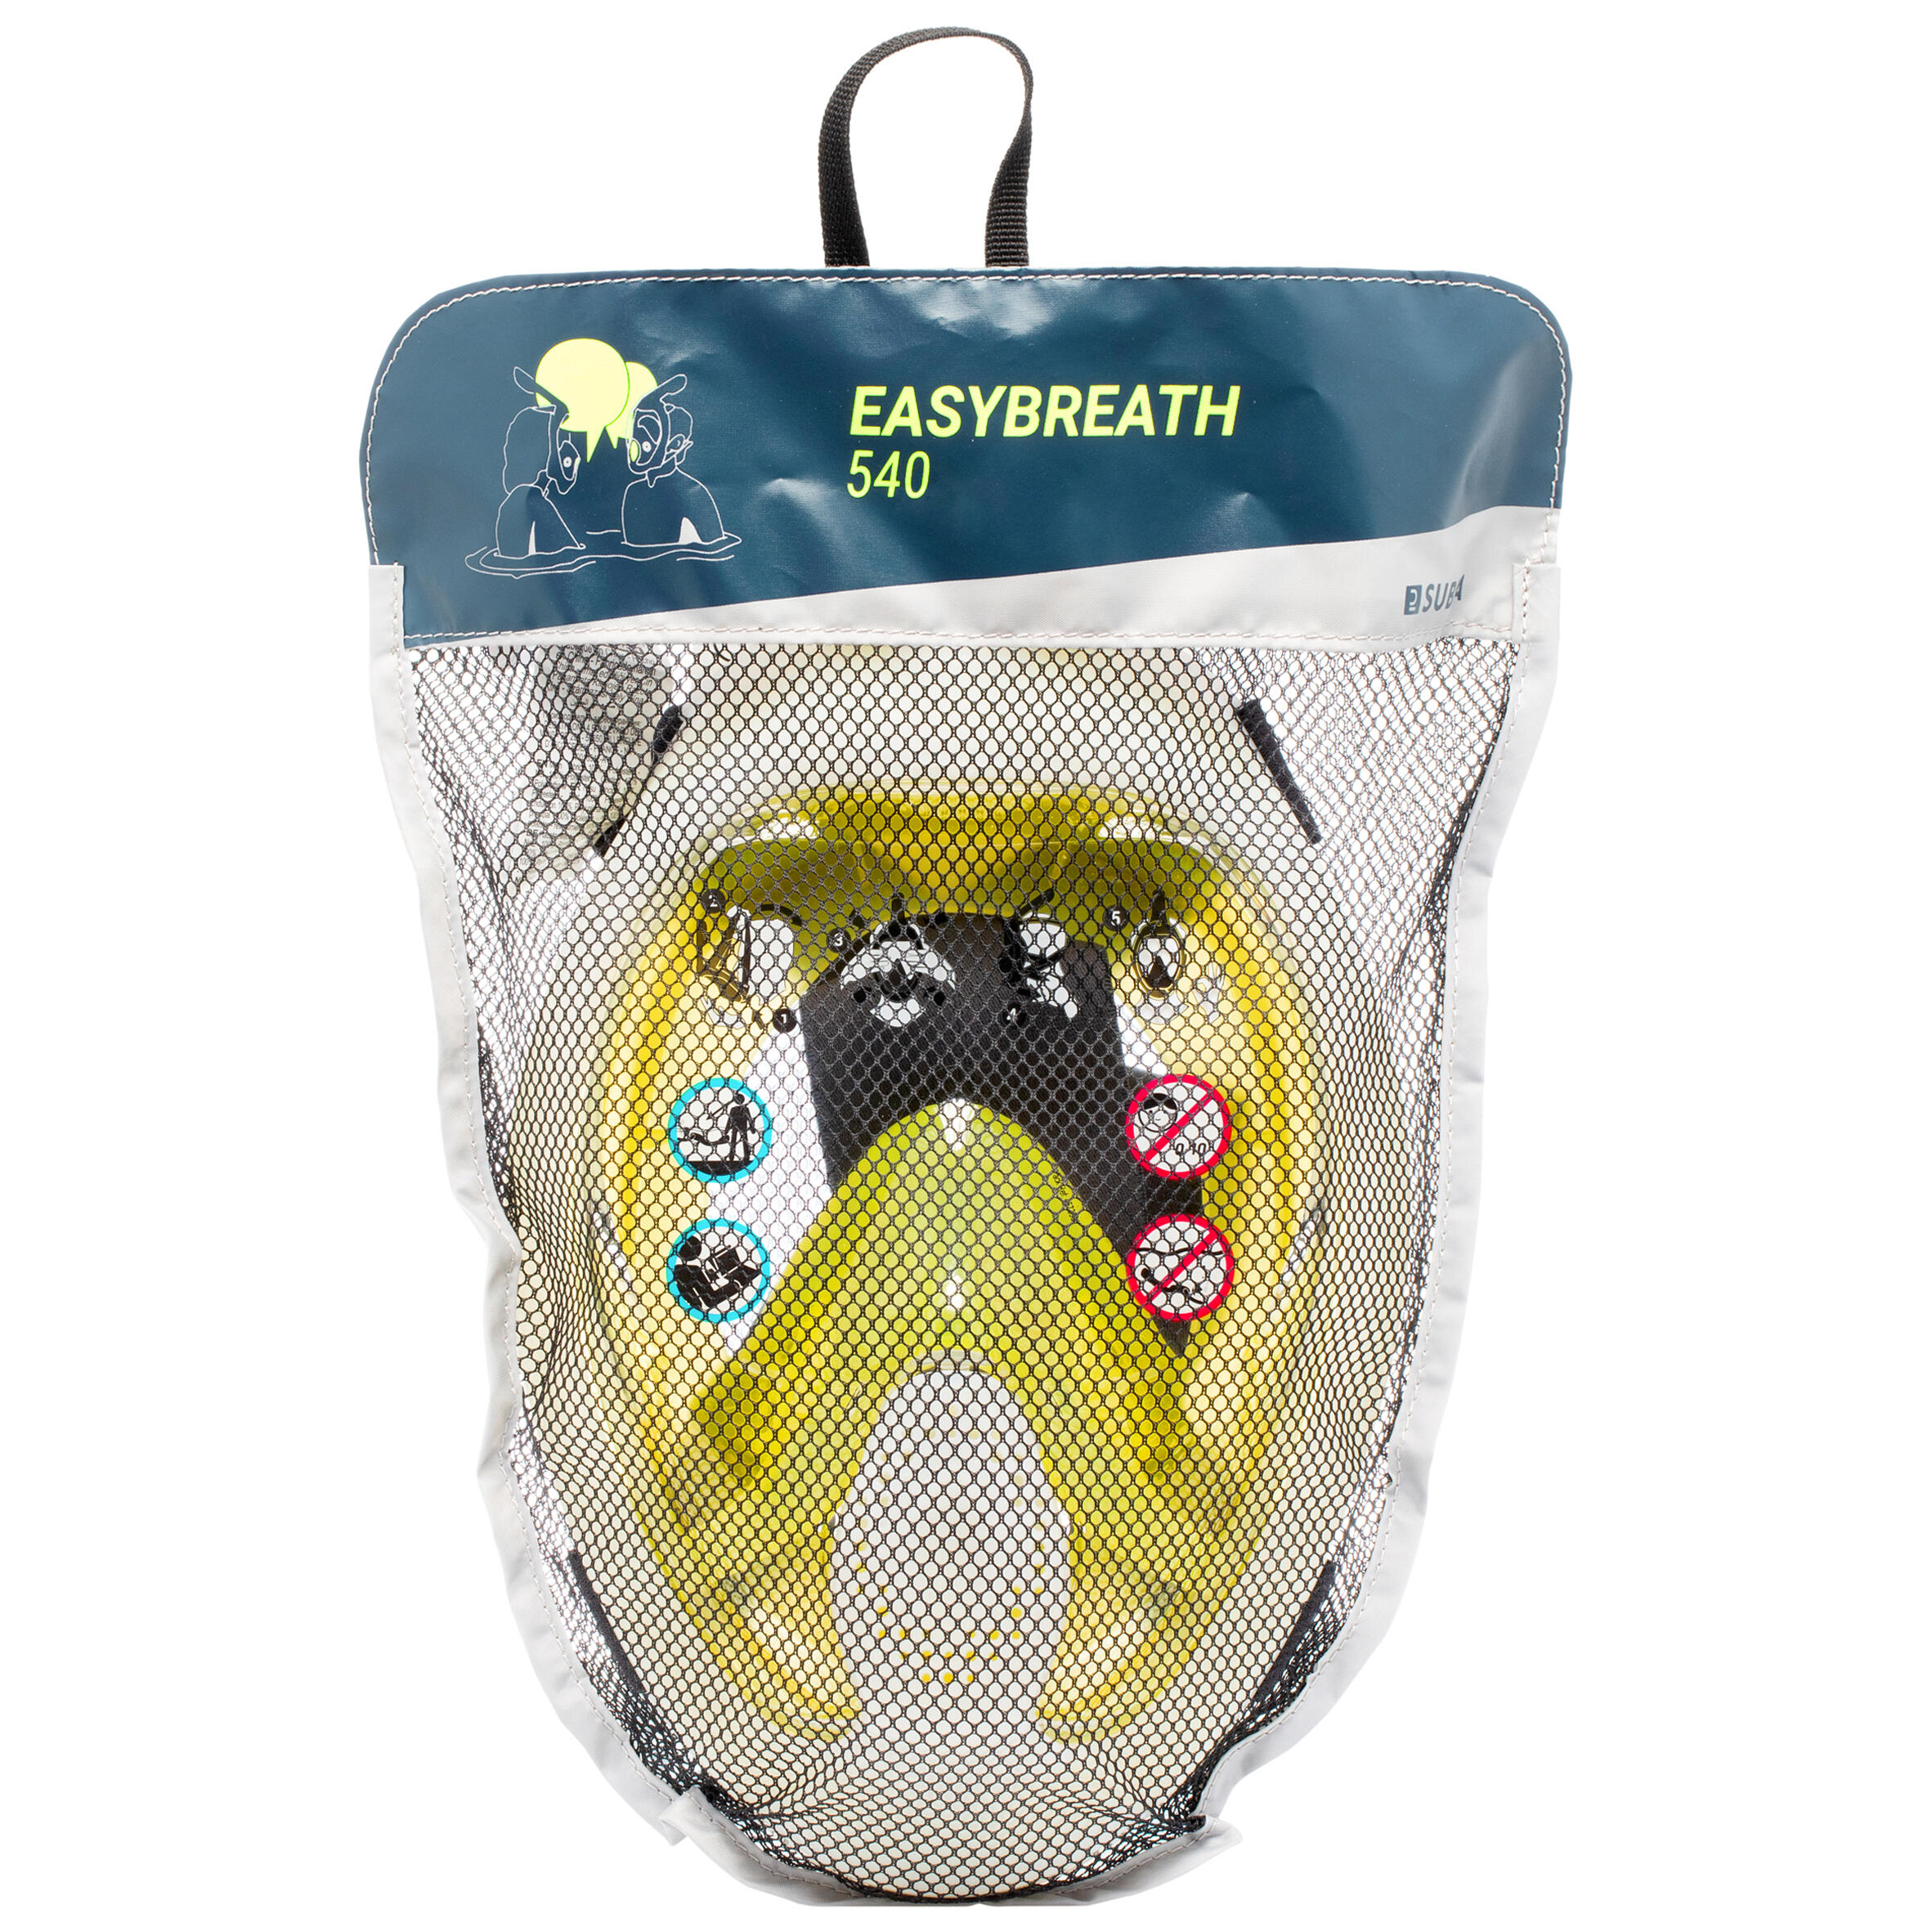 Adult Easybreath+ surface mask with an acoustic valve - 540 freetalk yellow 7/10